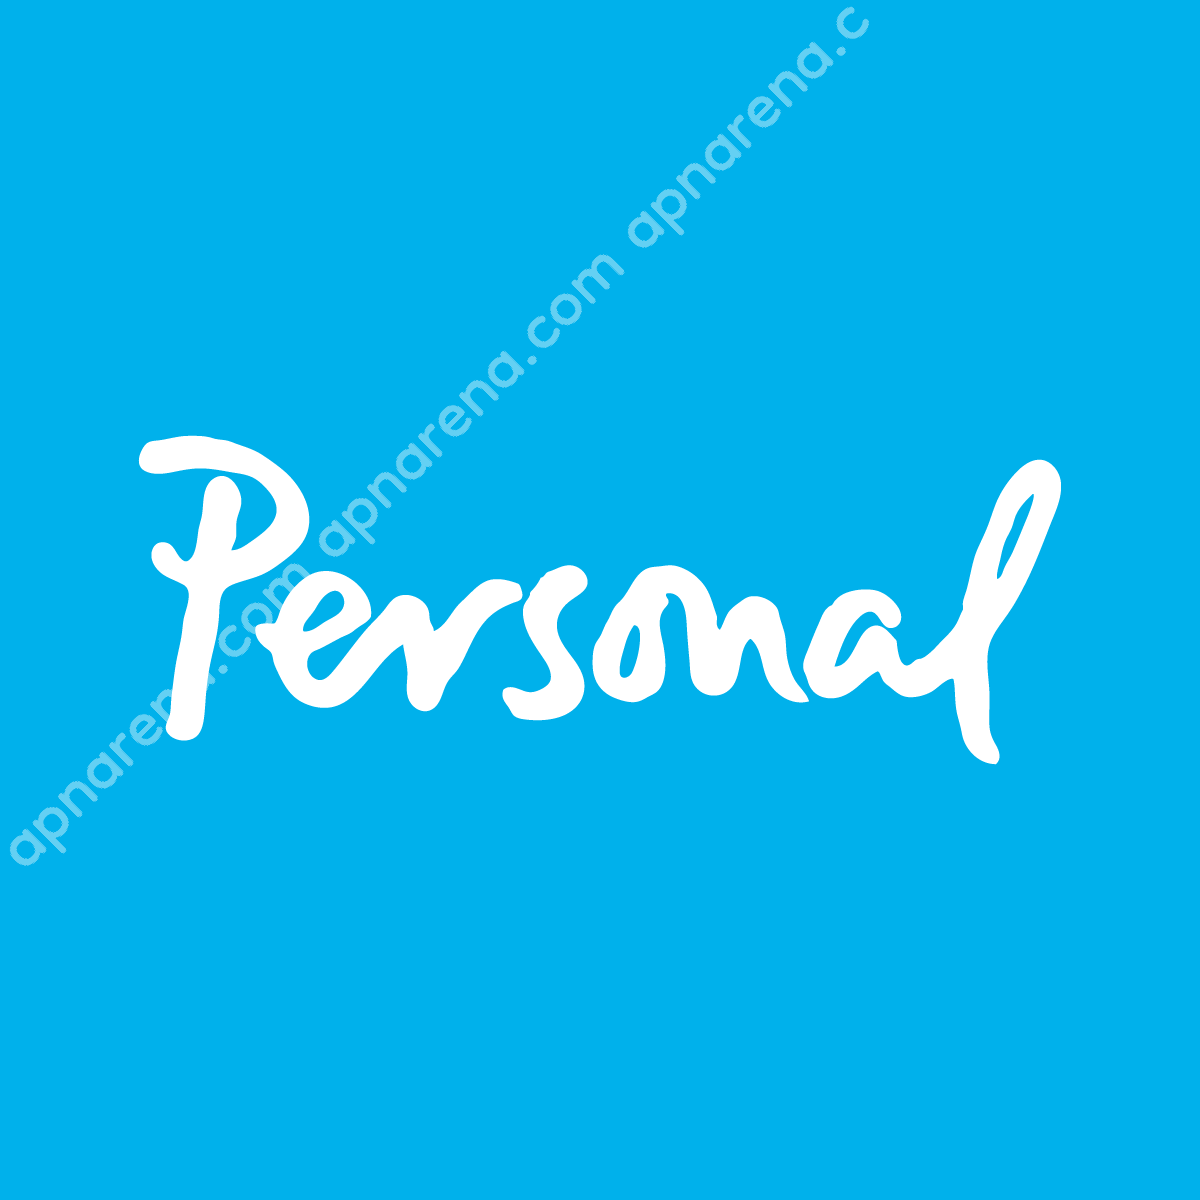 Personal Paraguay APN Internet Settings Android iPhone